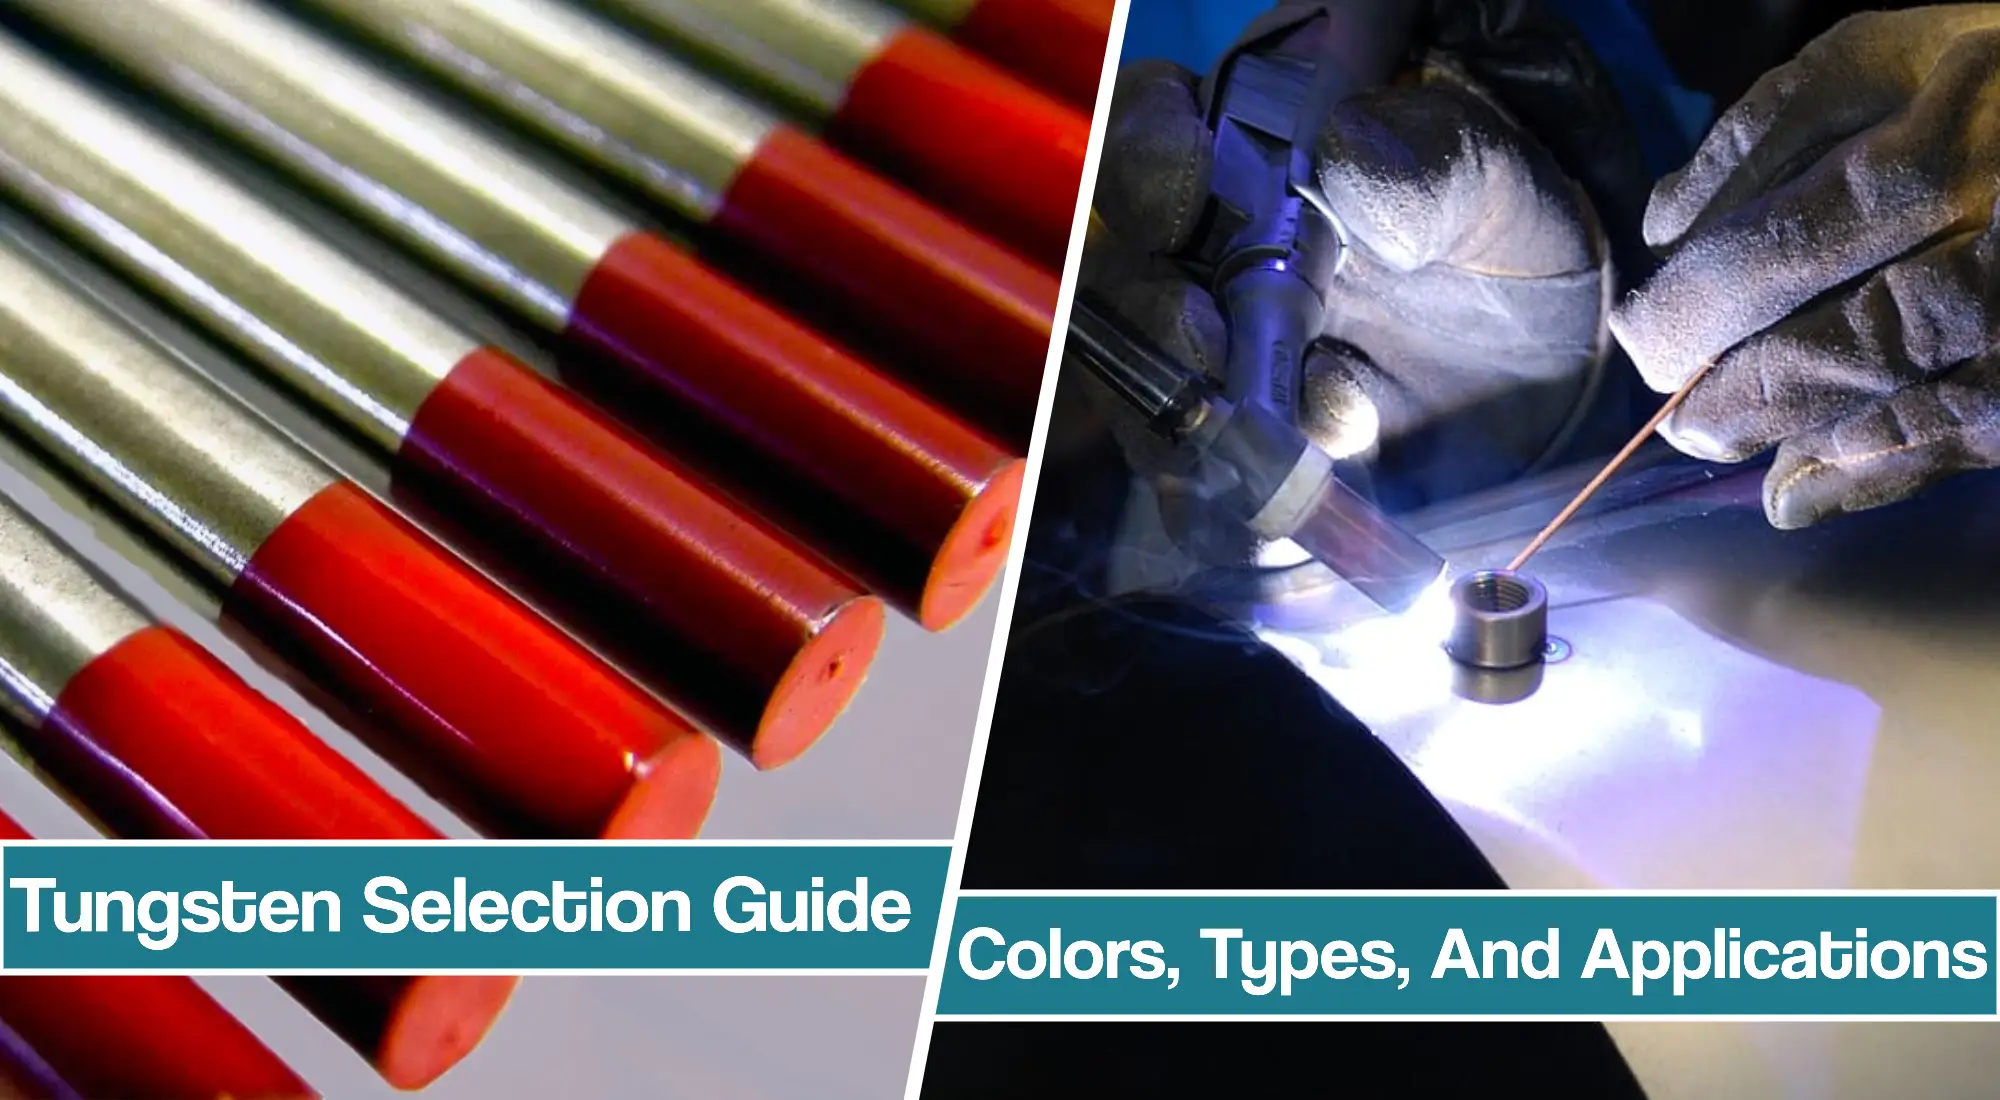 Featured image for the Tungsten Electrodes Guide article